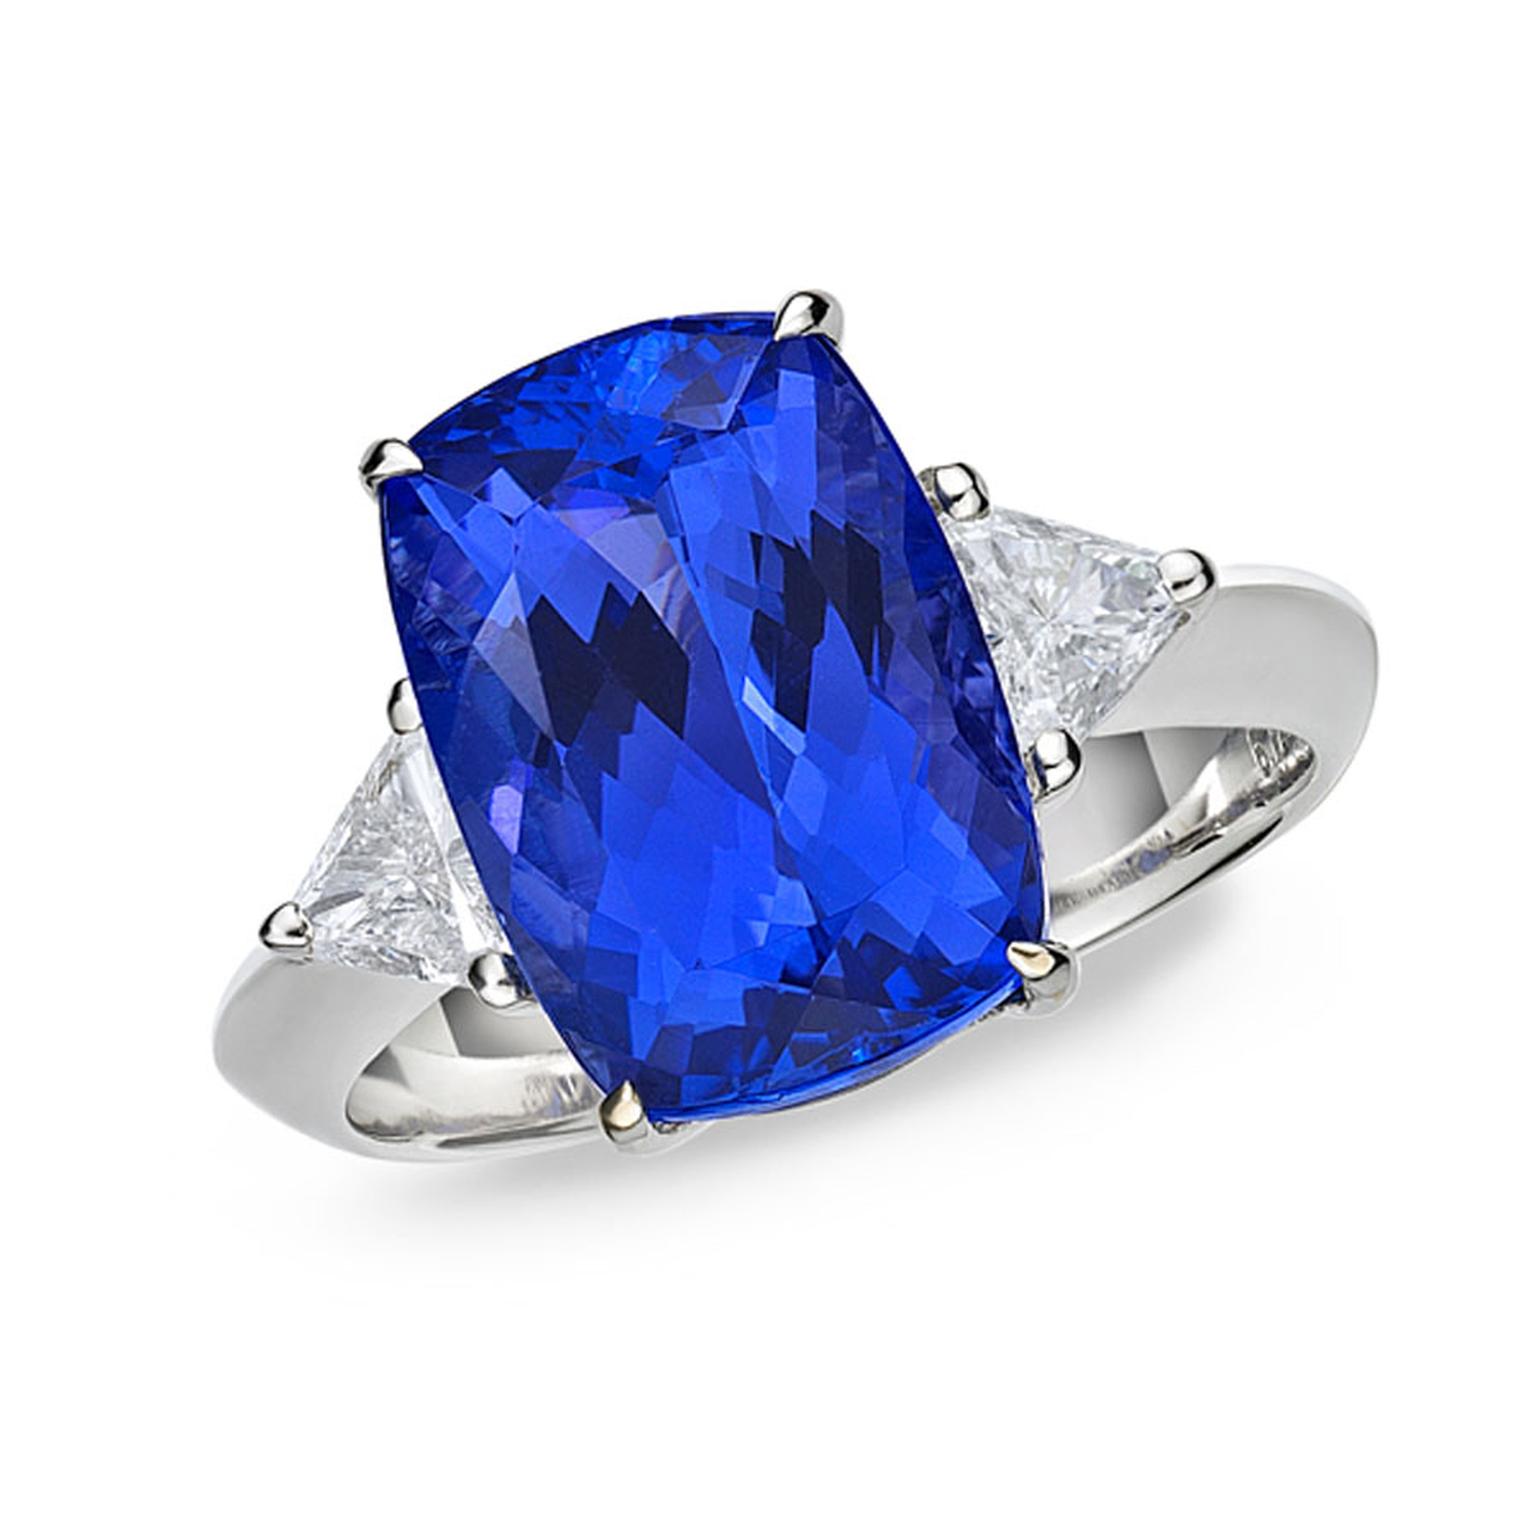 TanzaniteOne ring with a central tanzanite surrounded by two diamonds.